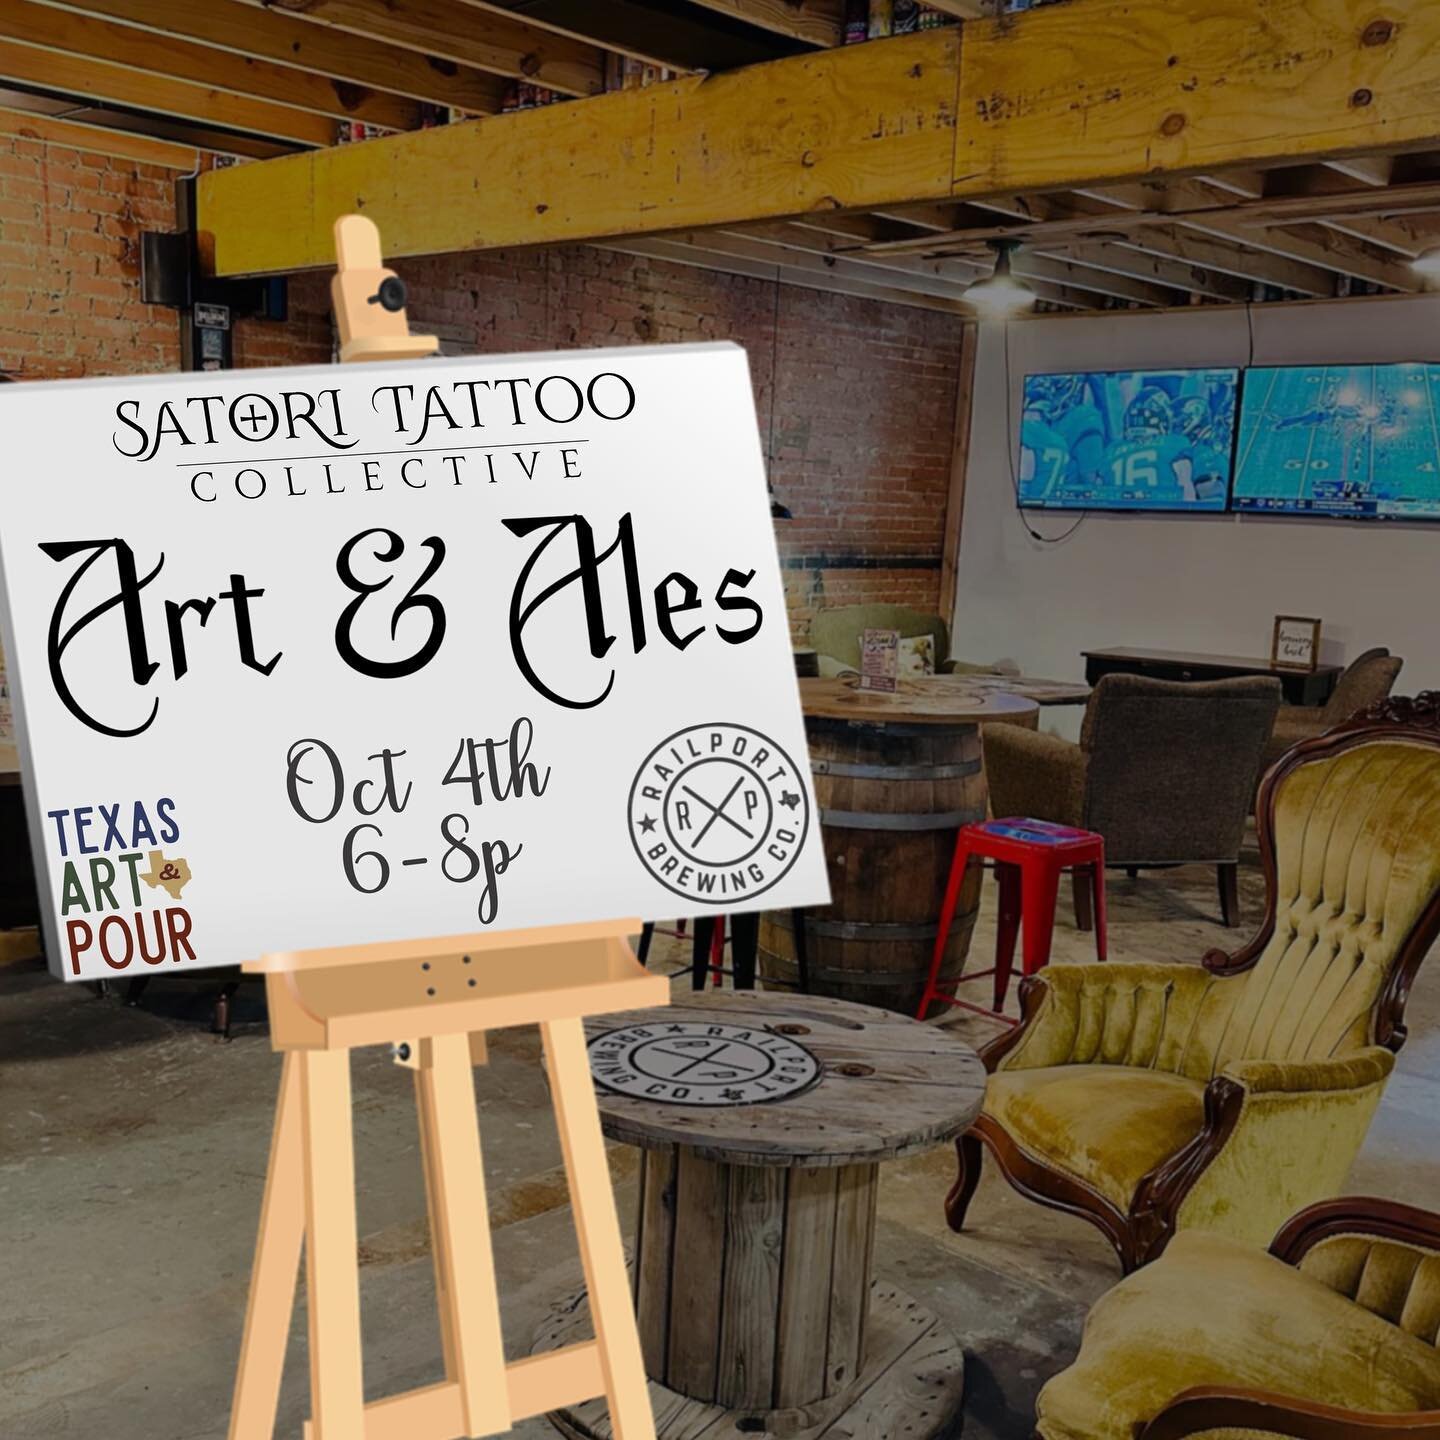 Join us for our first Art &amp; Ales! Co-hosted by Railport Brewing Company &amp; TX Art &amp; Pour. This is our first event of many to come. First Wednesday of every month! Mark your calendars. 

We will have coloring pages available for everyone, d